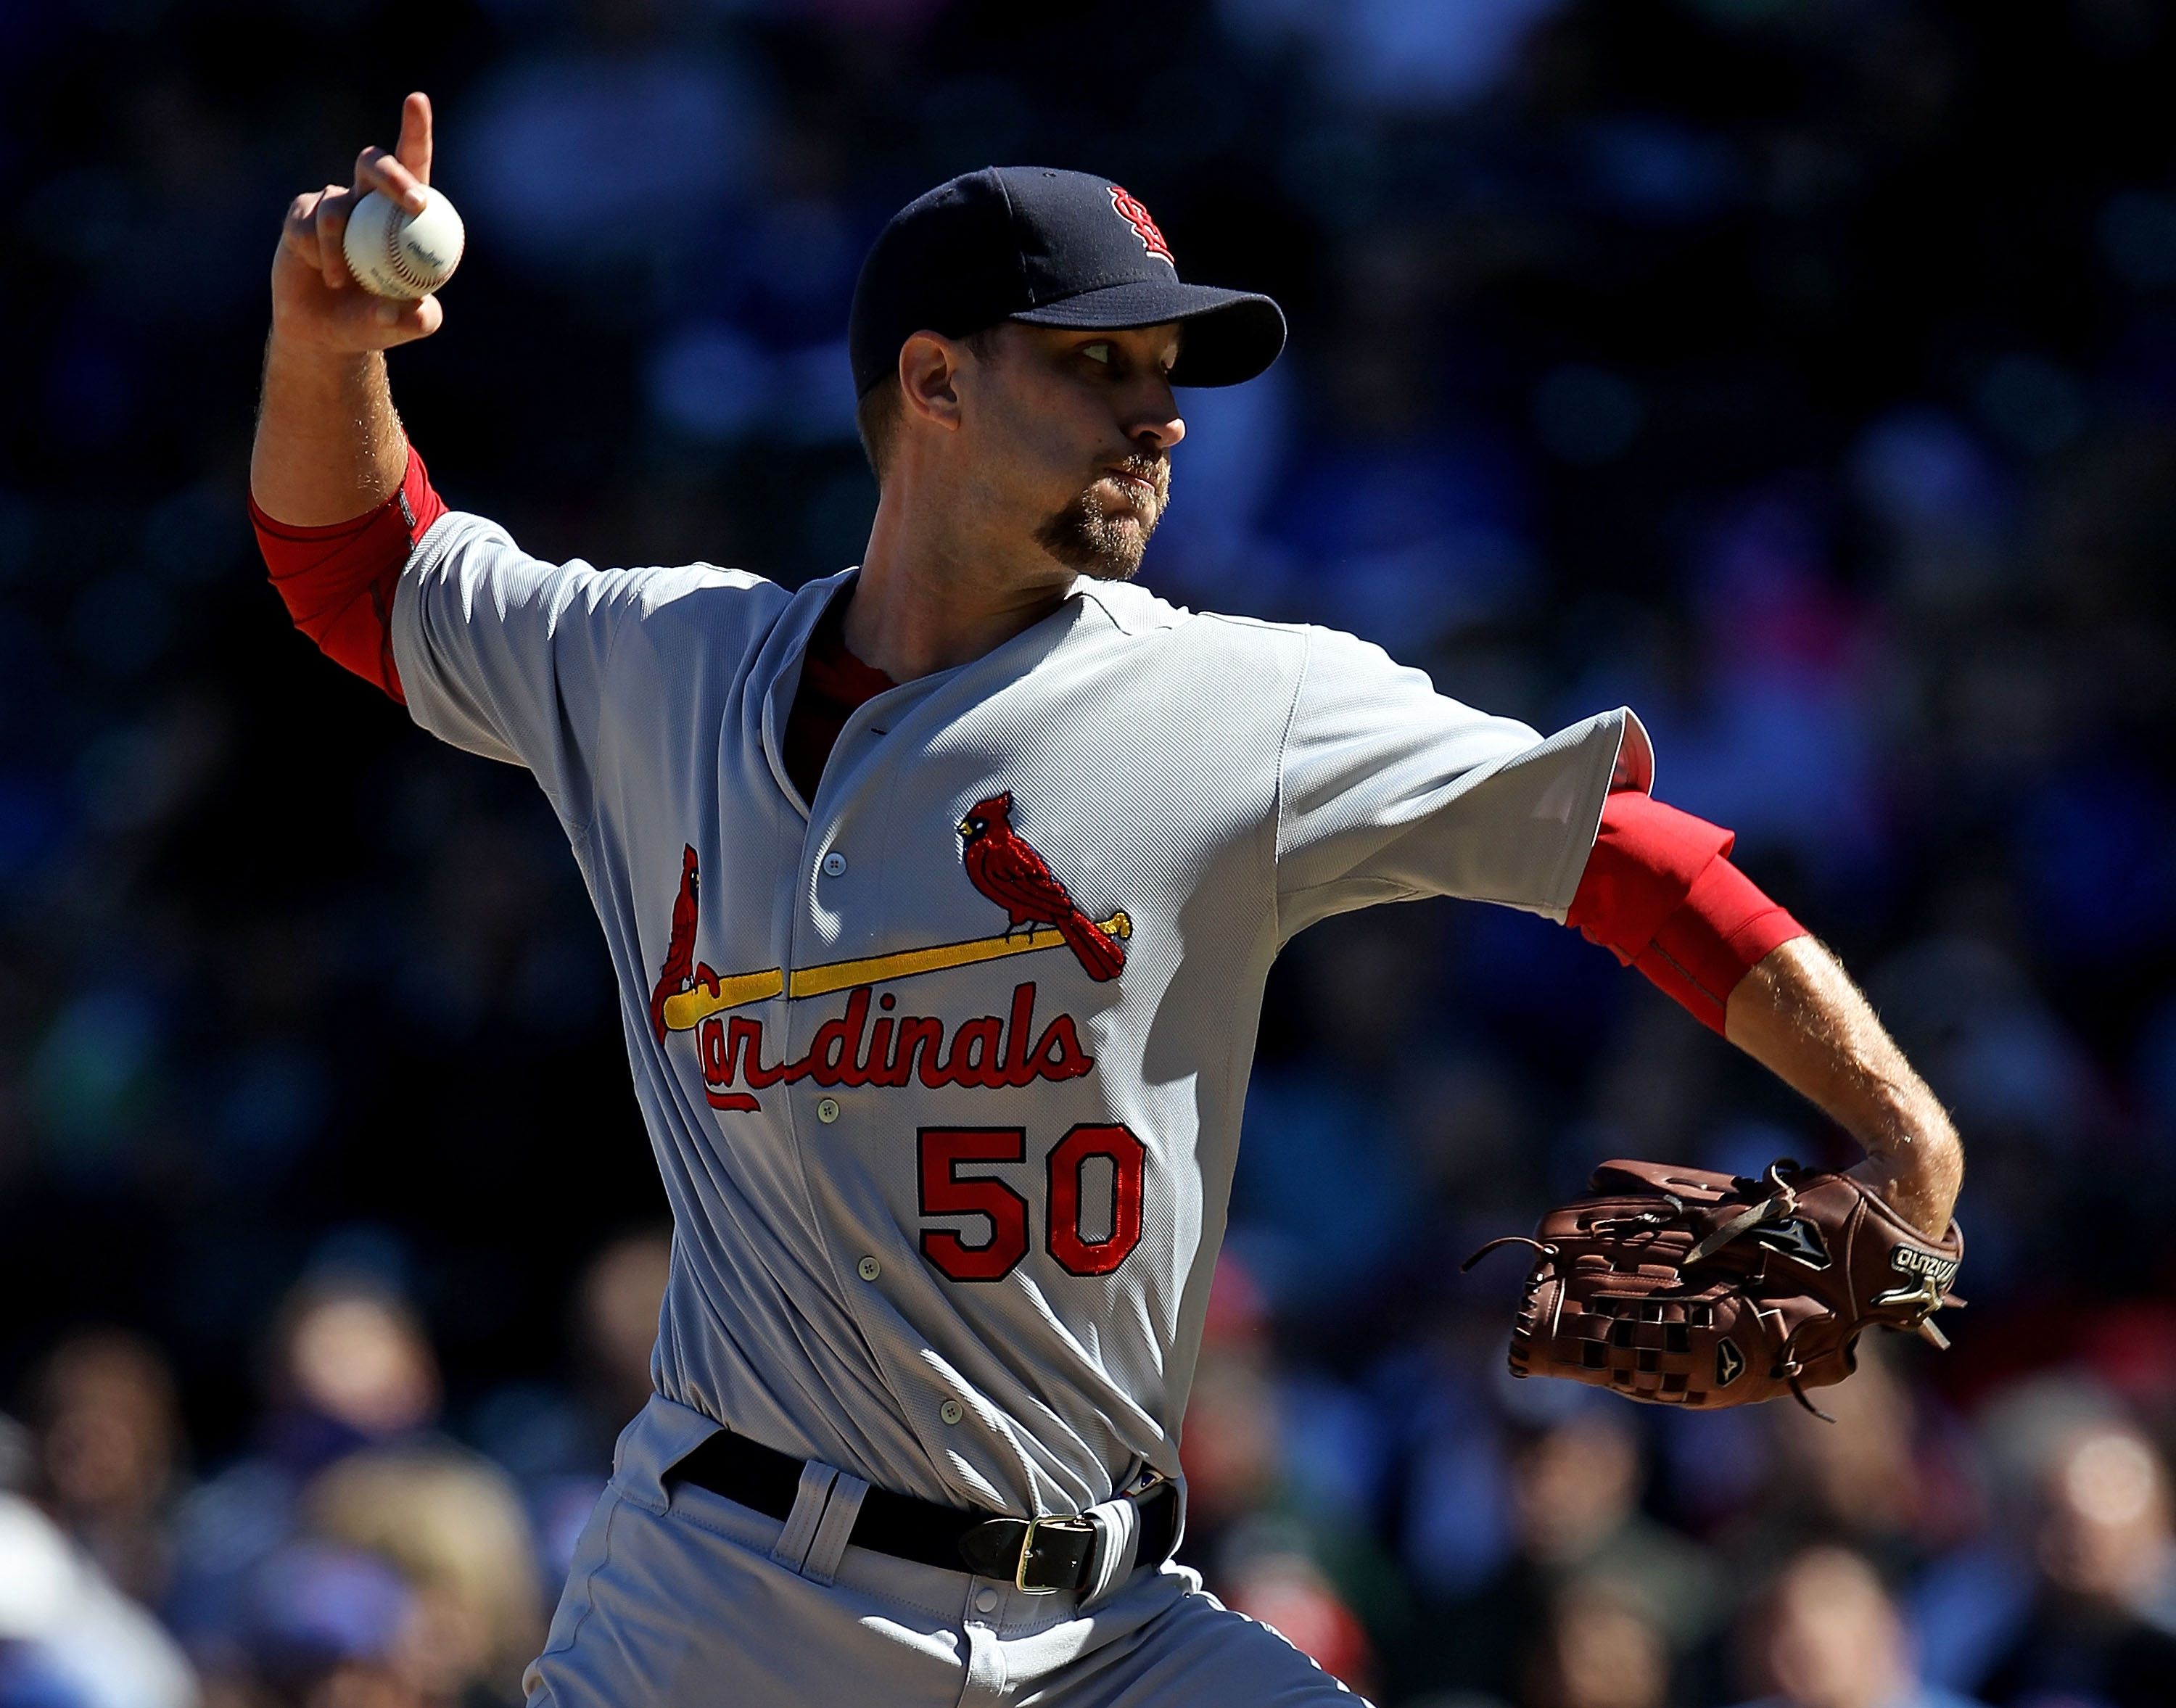 Pitchers Who Rake: Top Cardinals Pitchers at the Plate